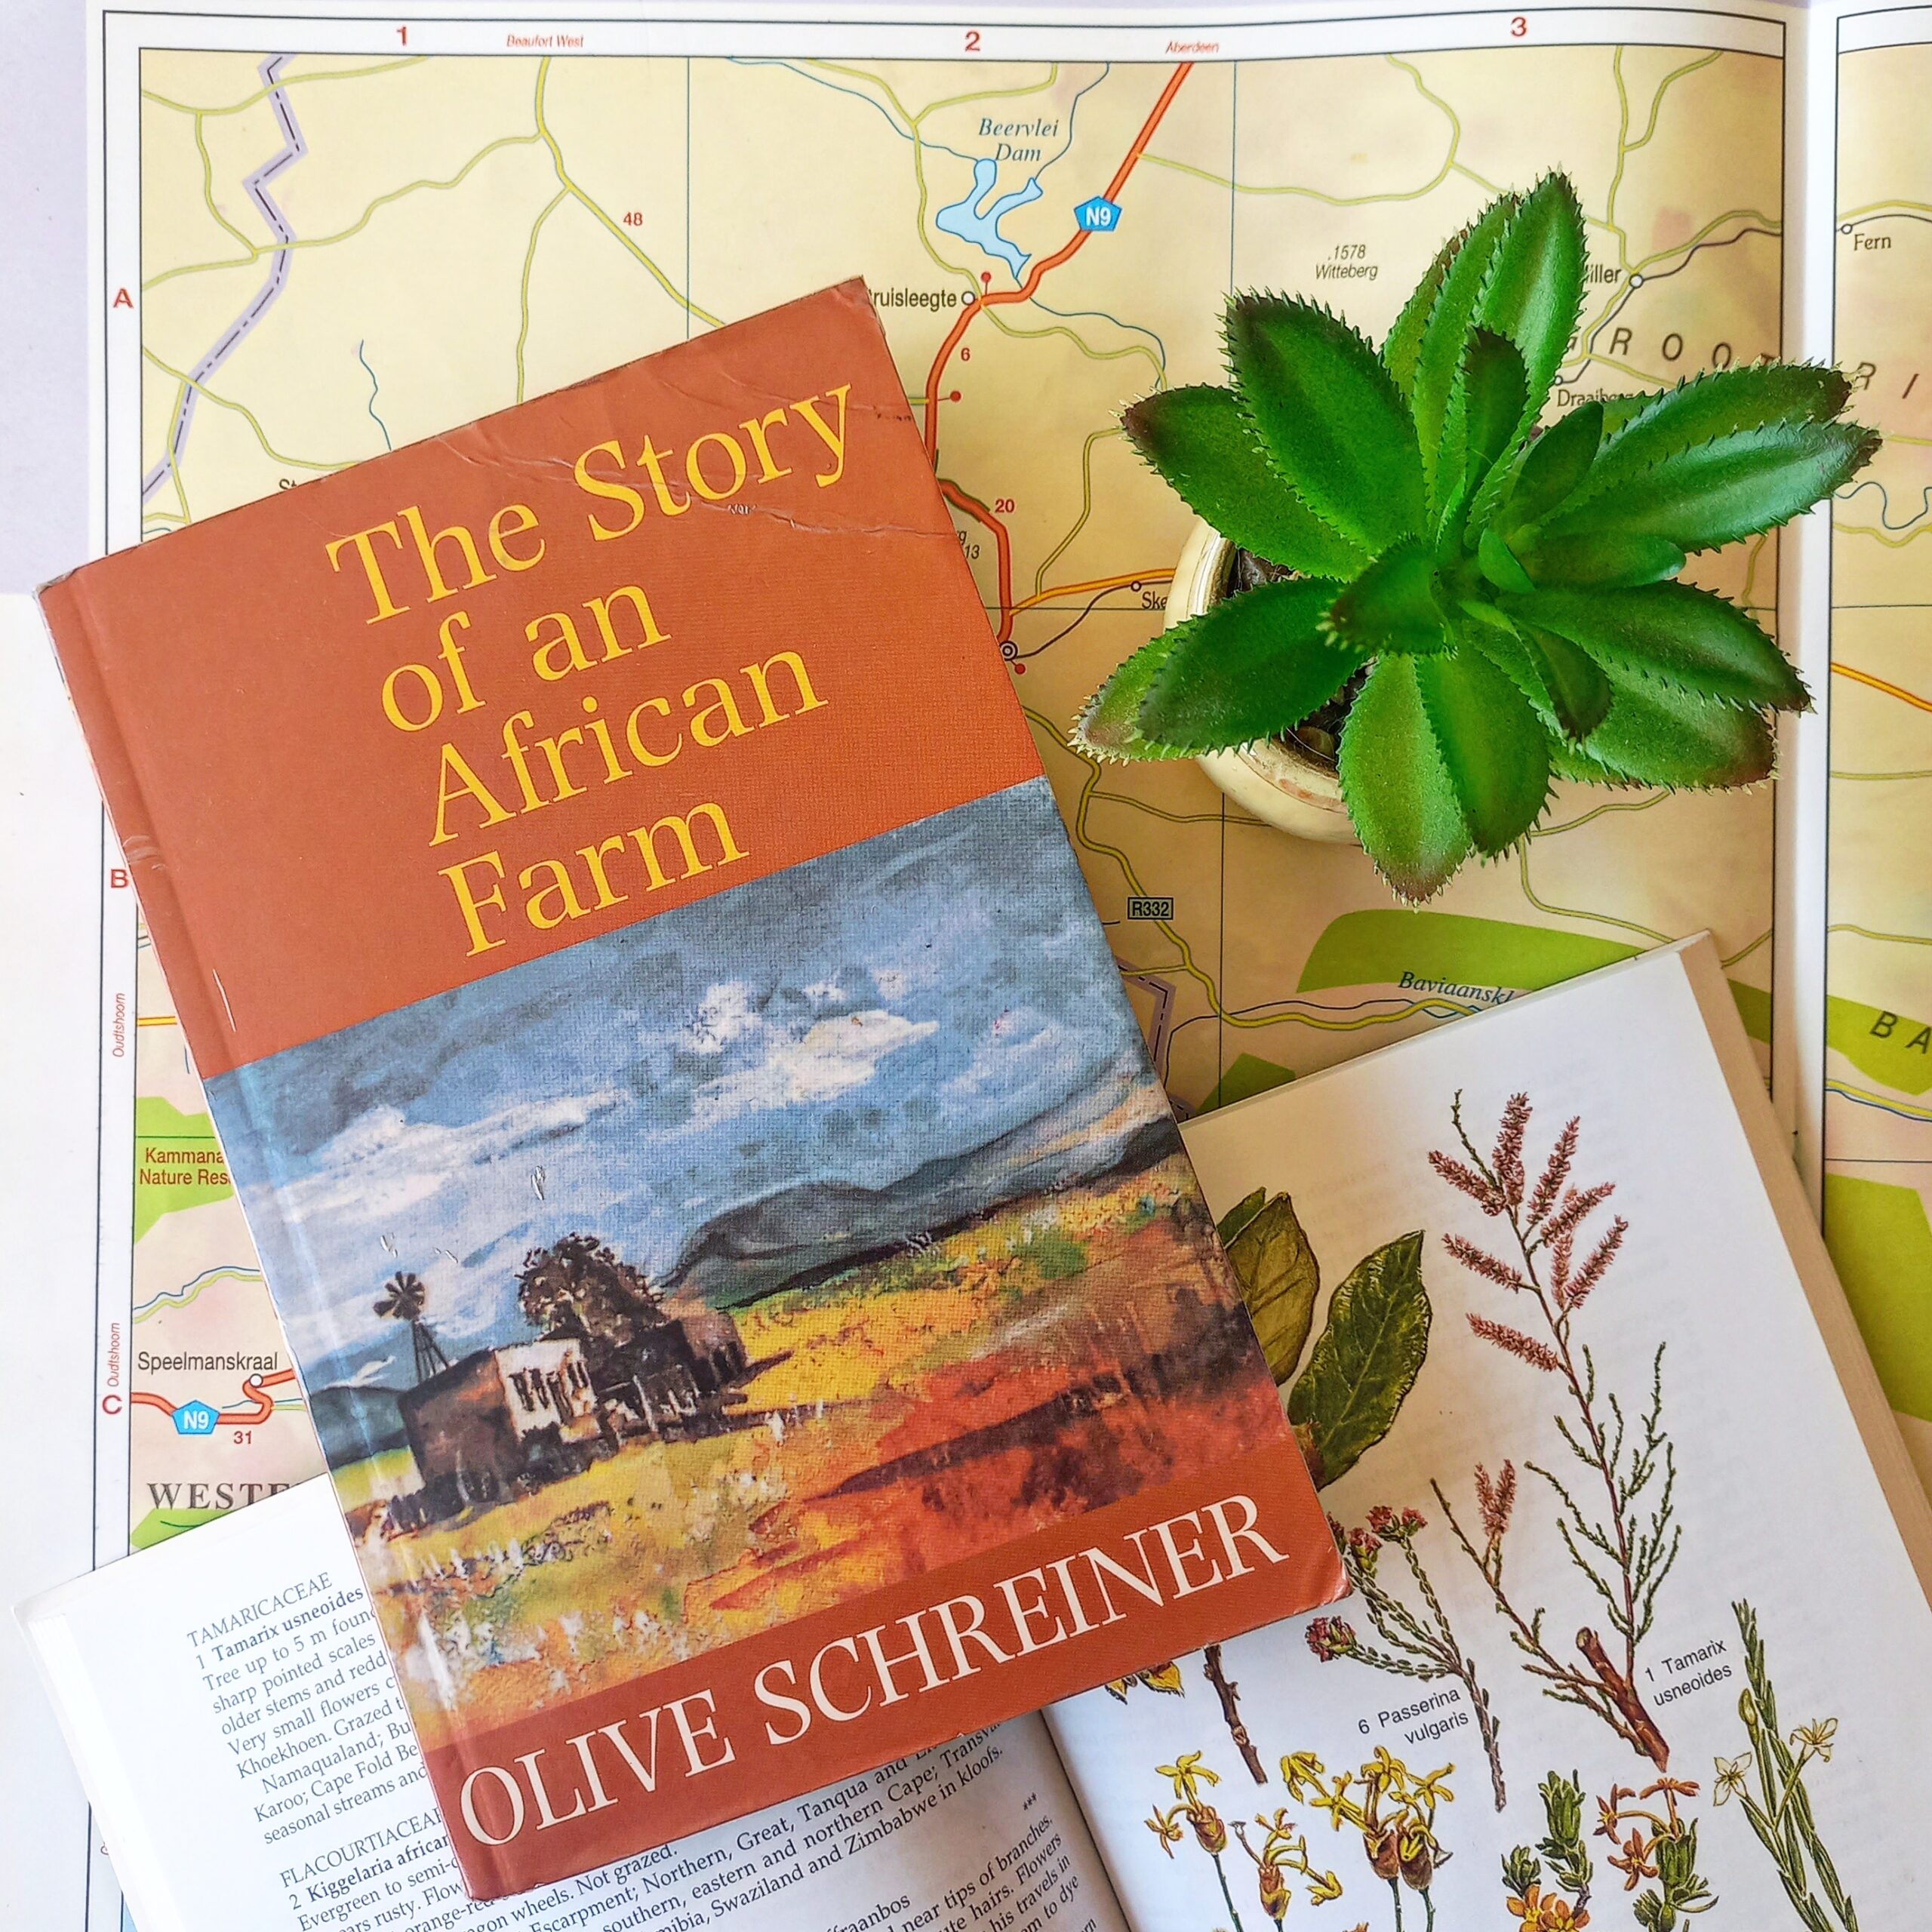 Revealing the Complexity of Human Relationships: A Review of Olive Schreiner’s ‘Story of an African Farm’